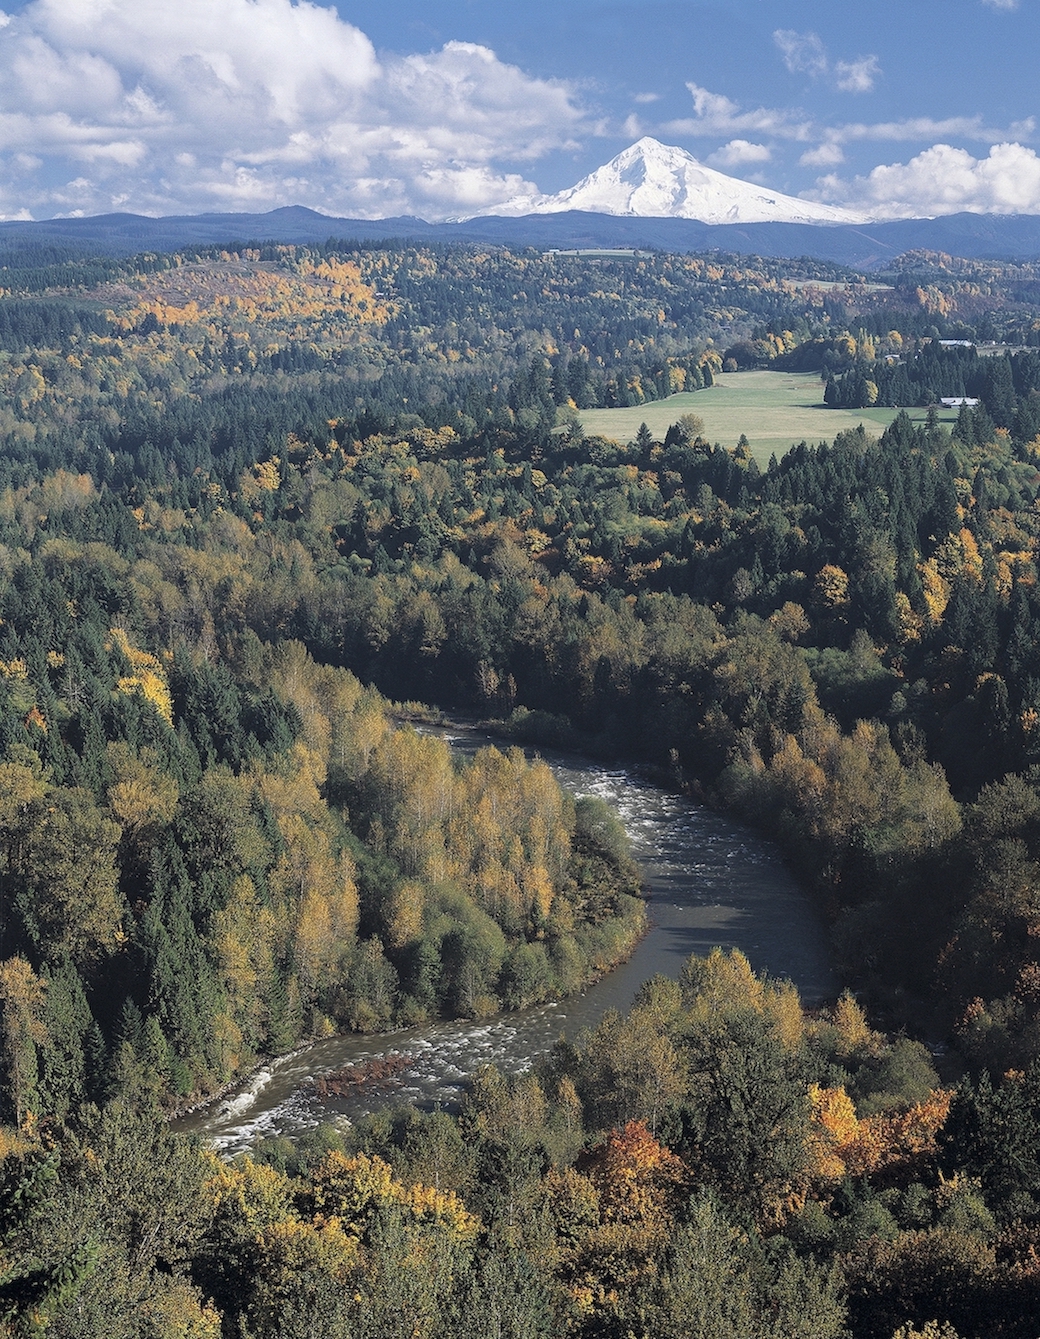 Mount Hood and the w:Sandy River, as seen from Jonsrud Viewpoint | © Sandy Historical Society/WikiCommons